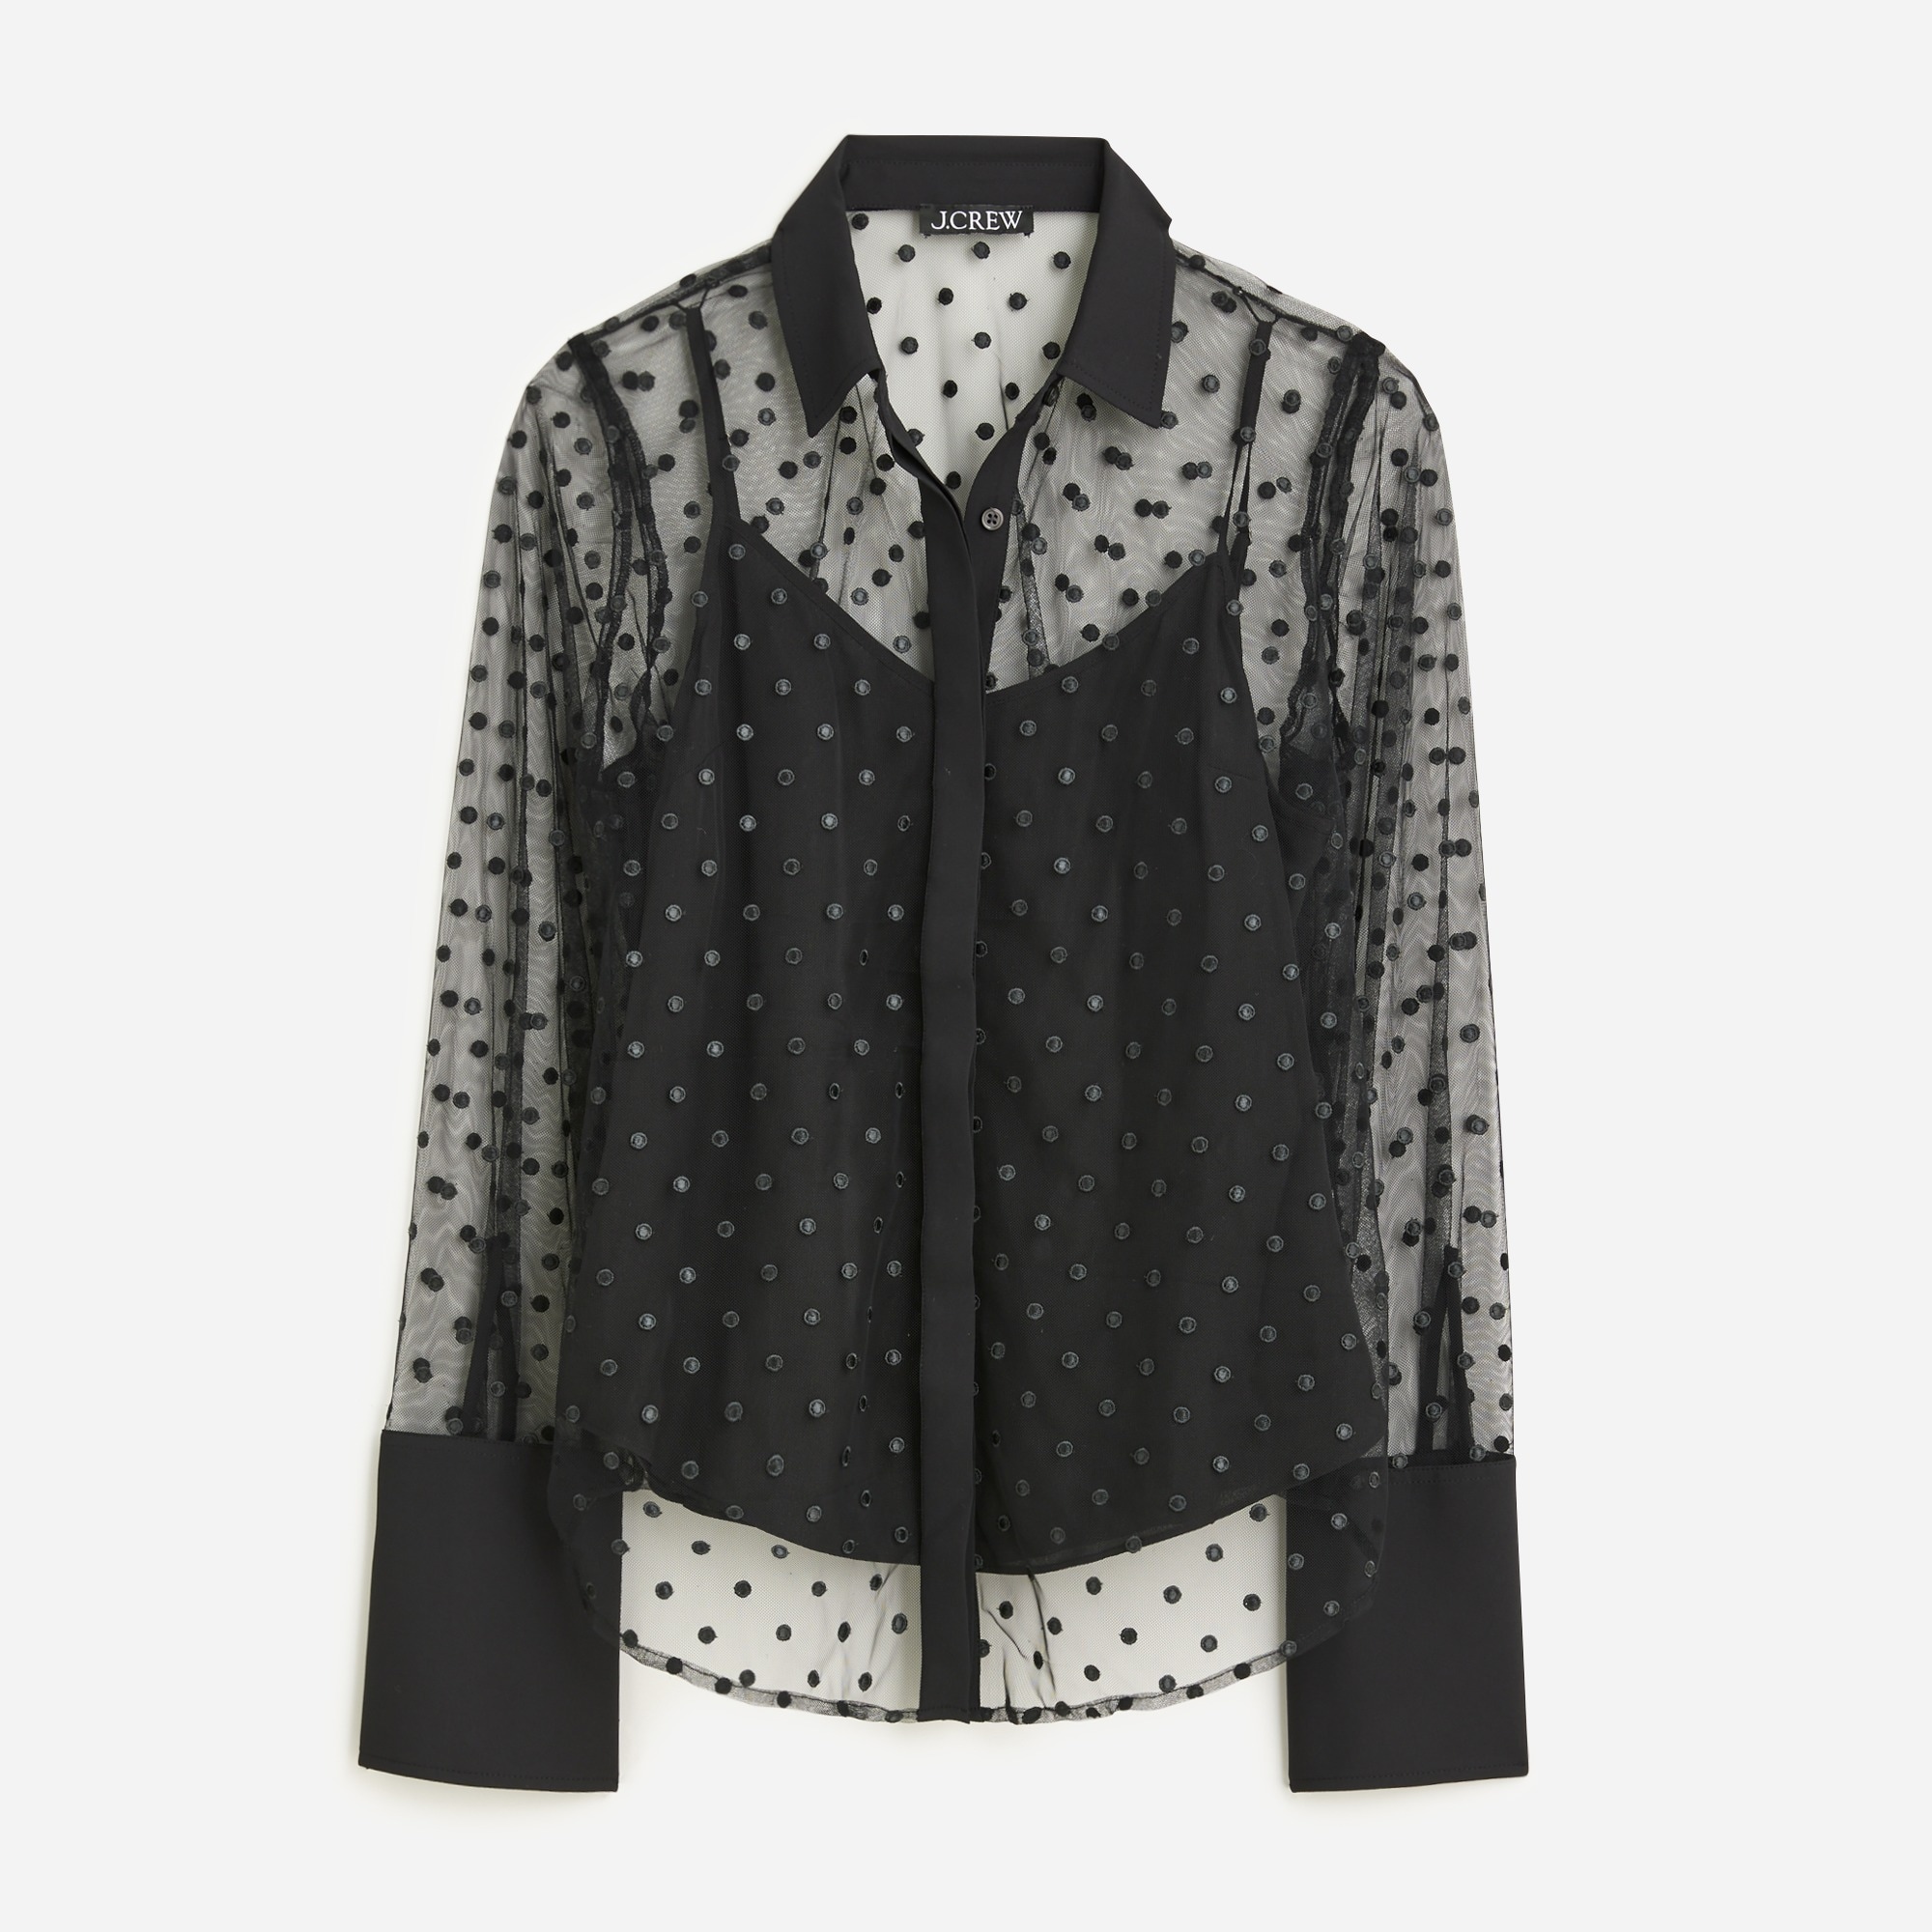  Sheer button-up with camisole in dot print